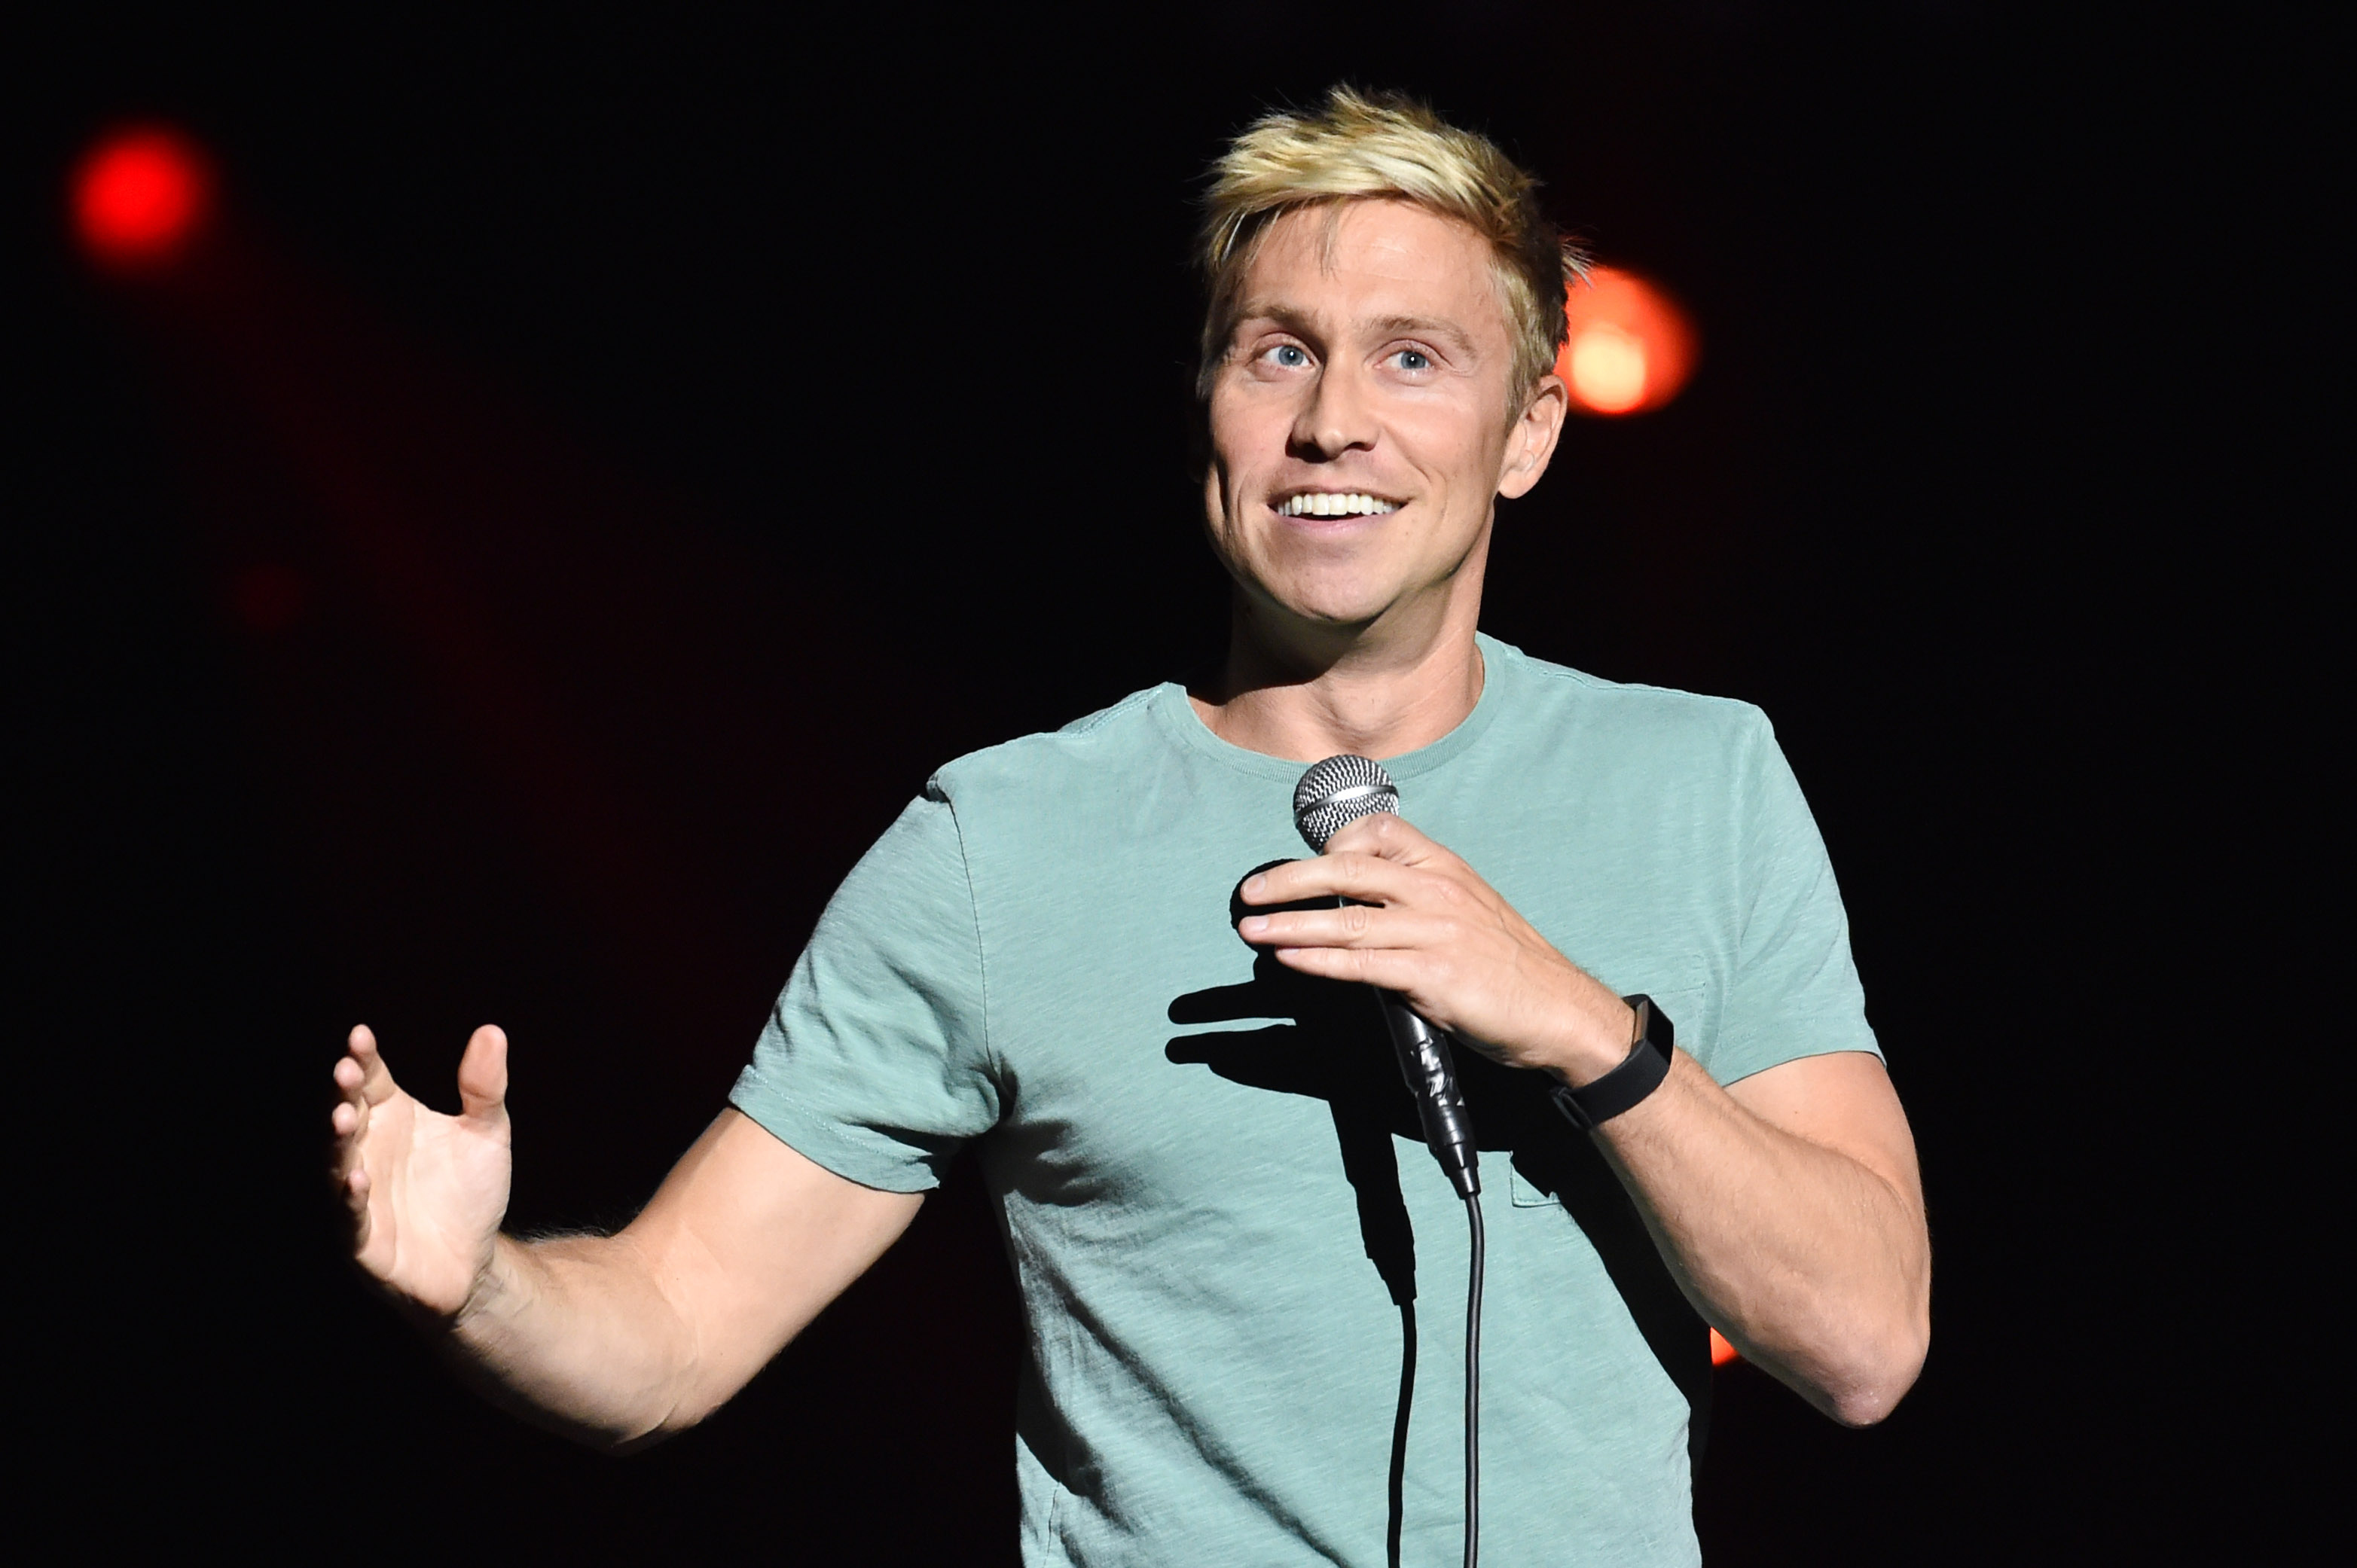 Comedian Russell Howard performed at P&J Live this evening.